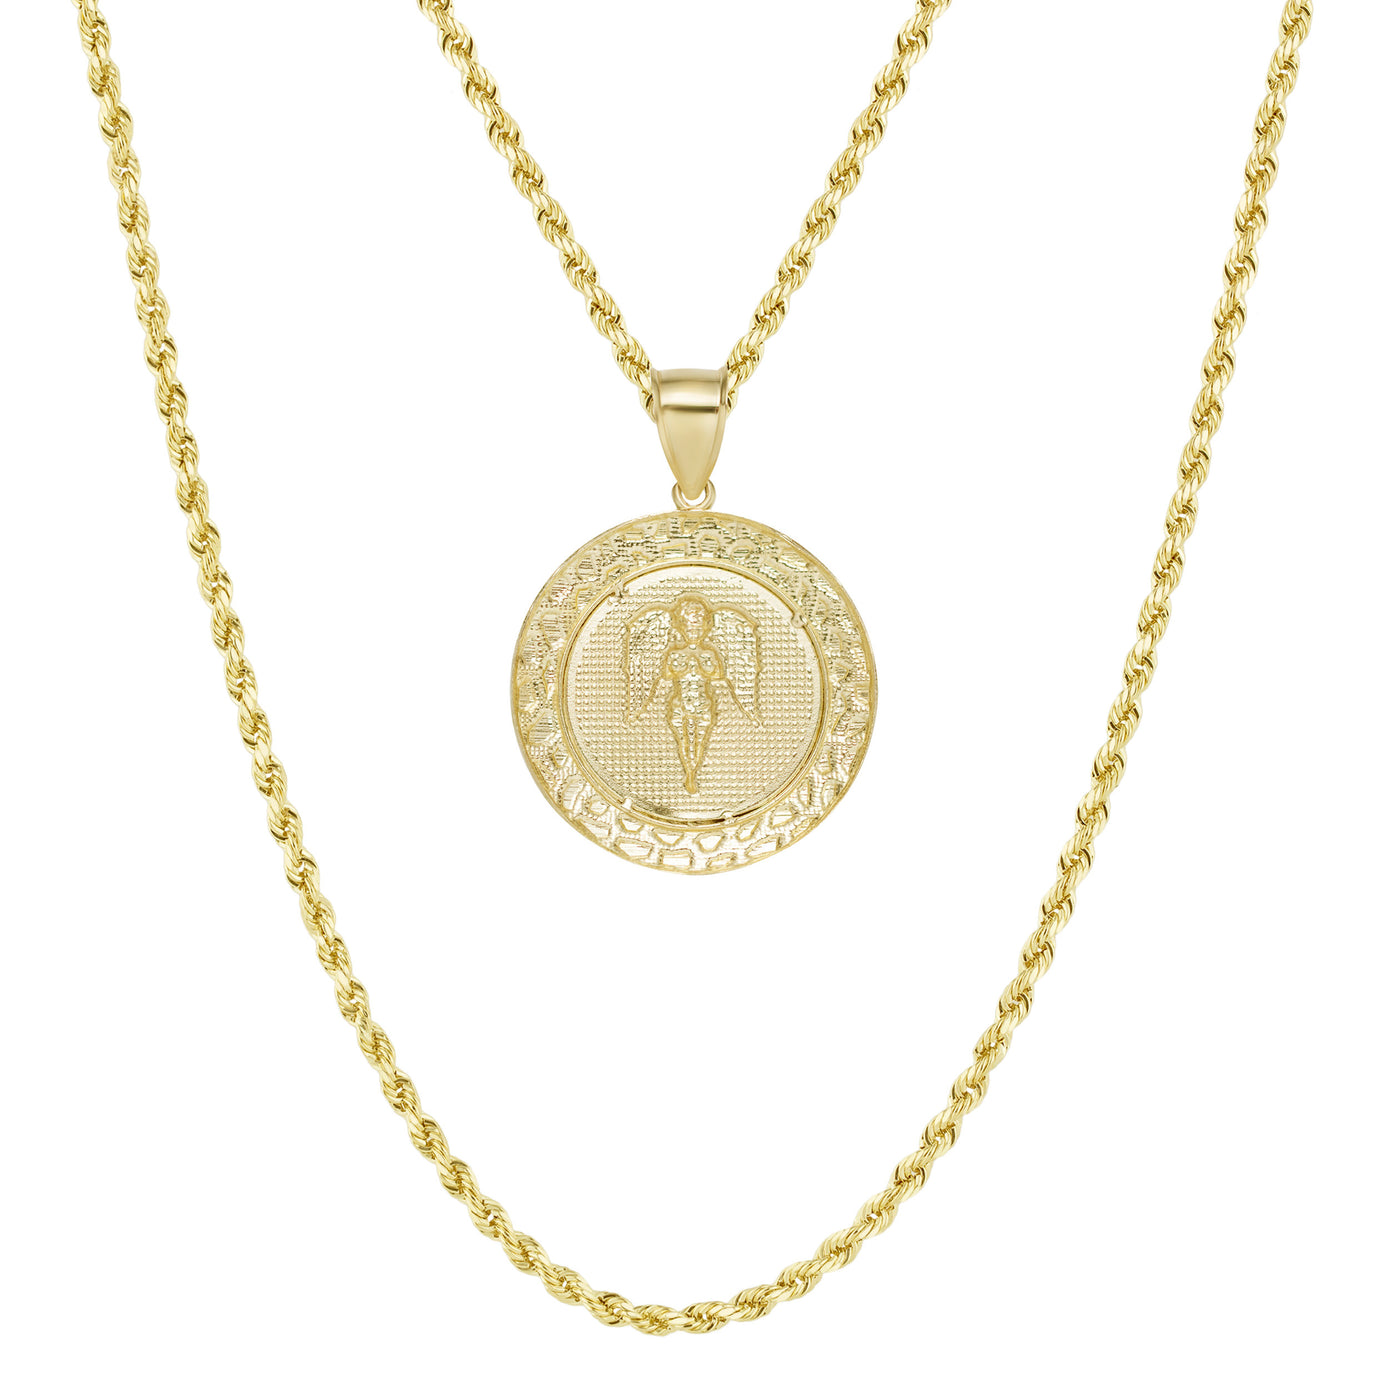 1 3/4" Baby Angel Nugget Medallion Pendant & Chain Necklace Set 10K Yellow Gold